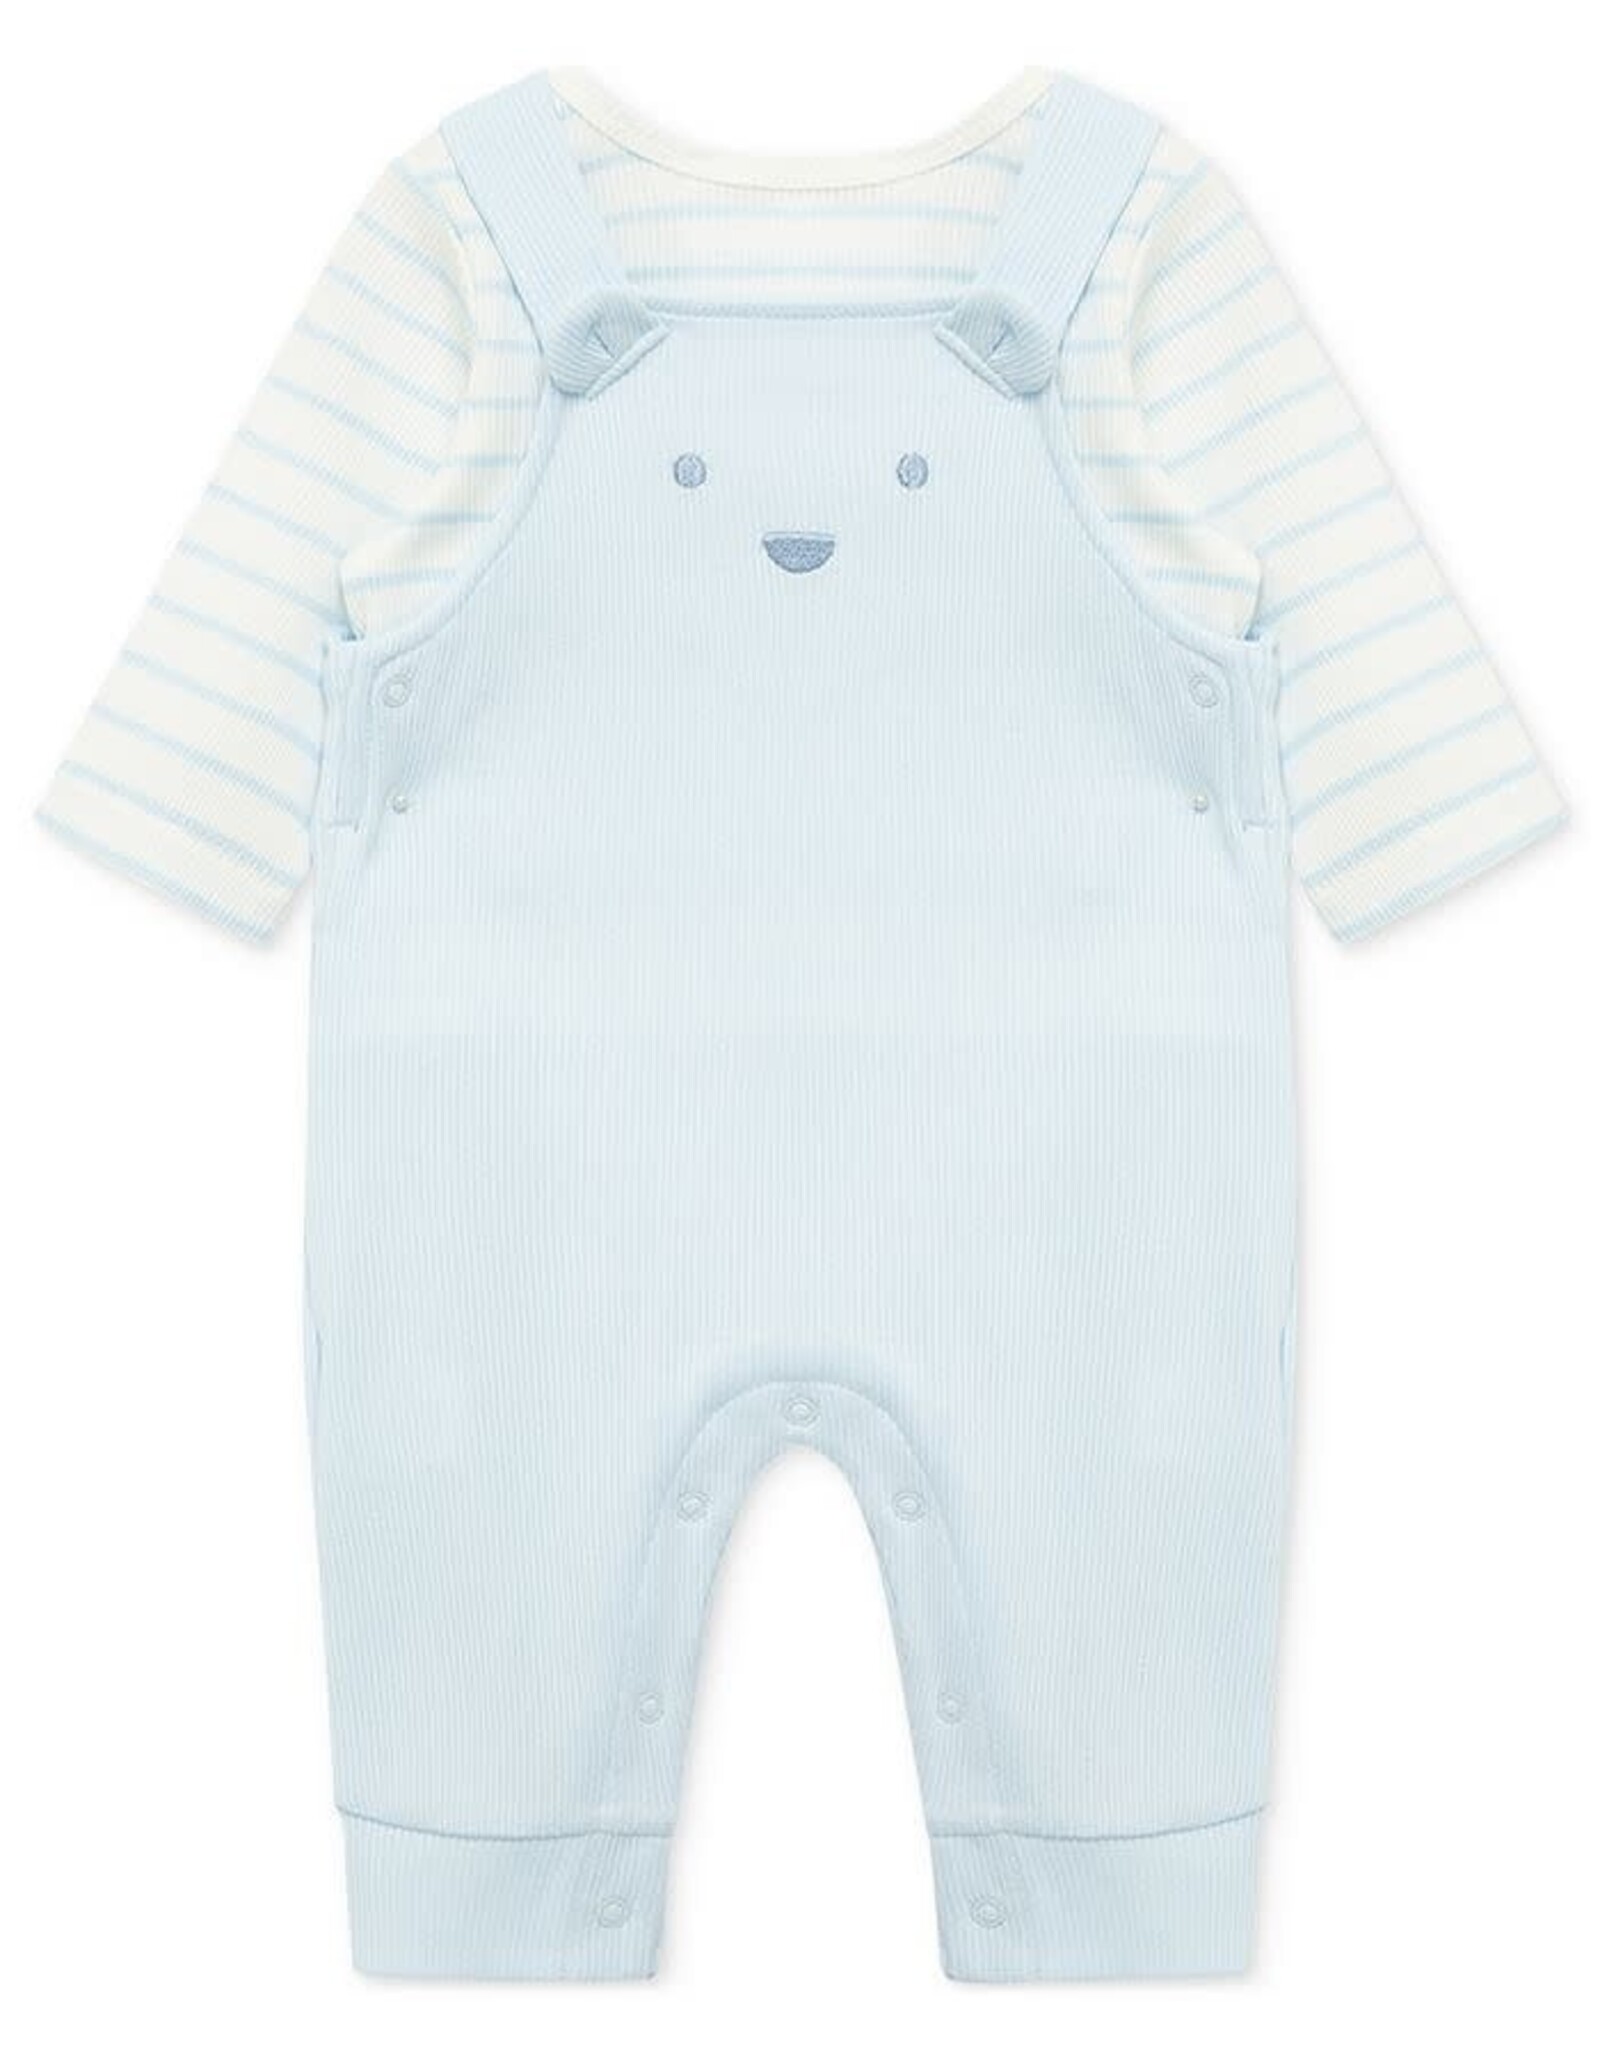 Little Me Baby Wonder Coverall Set